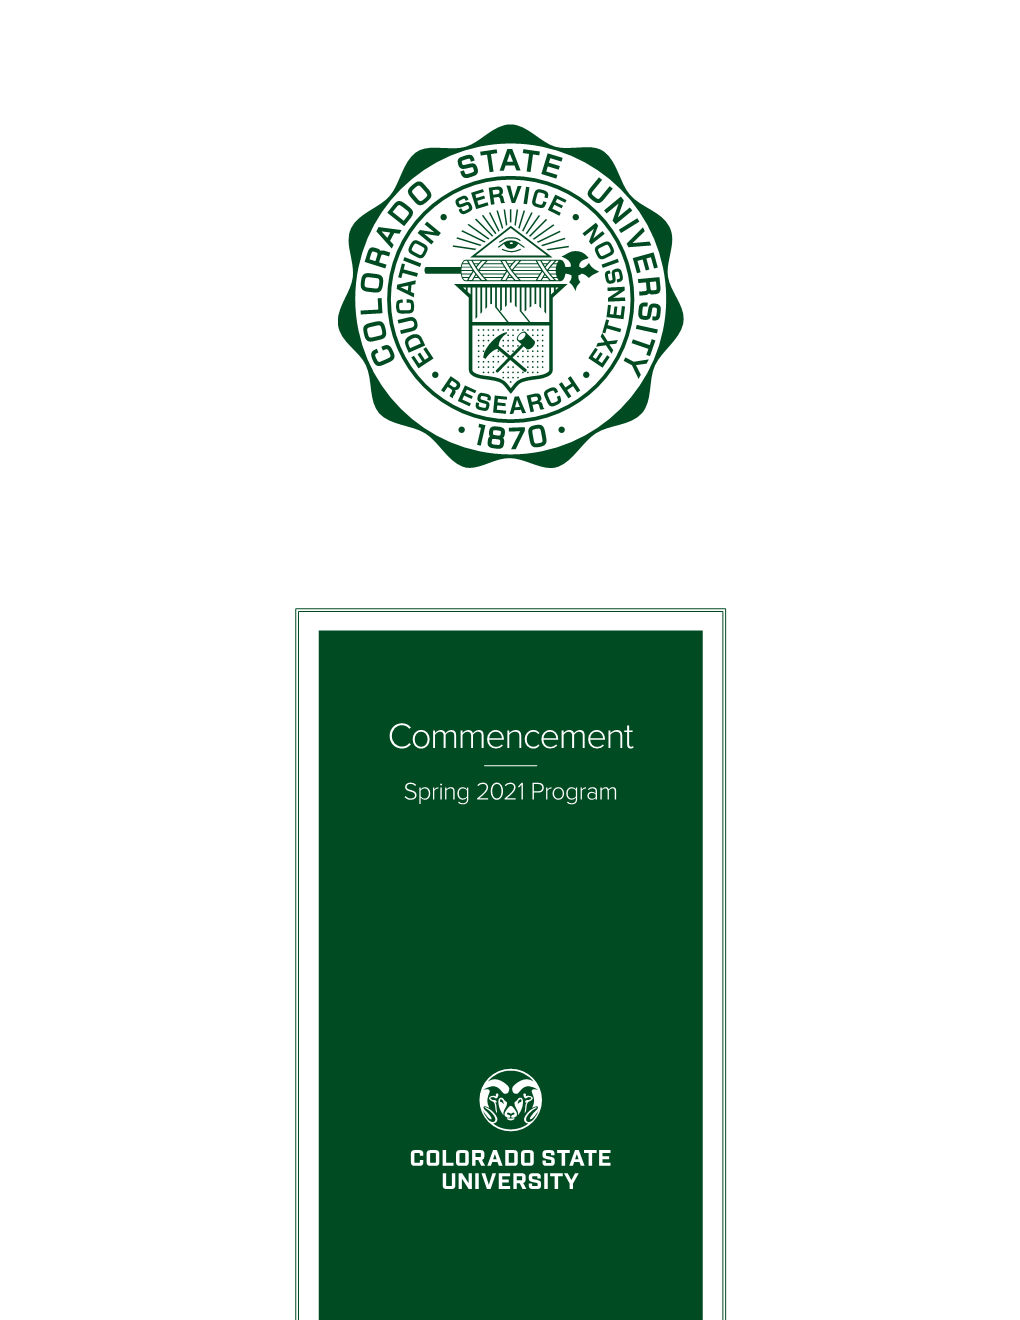 Colorado State University Commencement Spring 2021